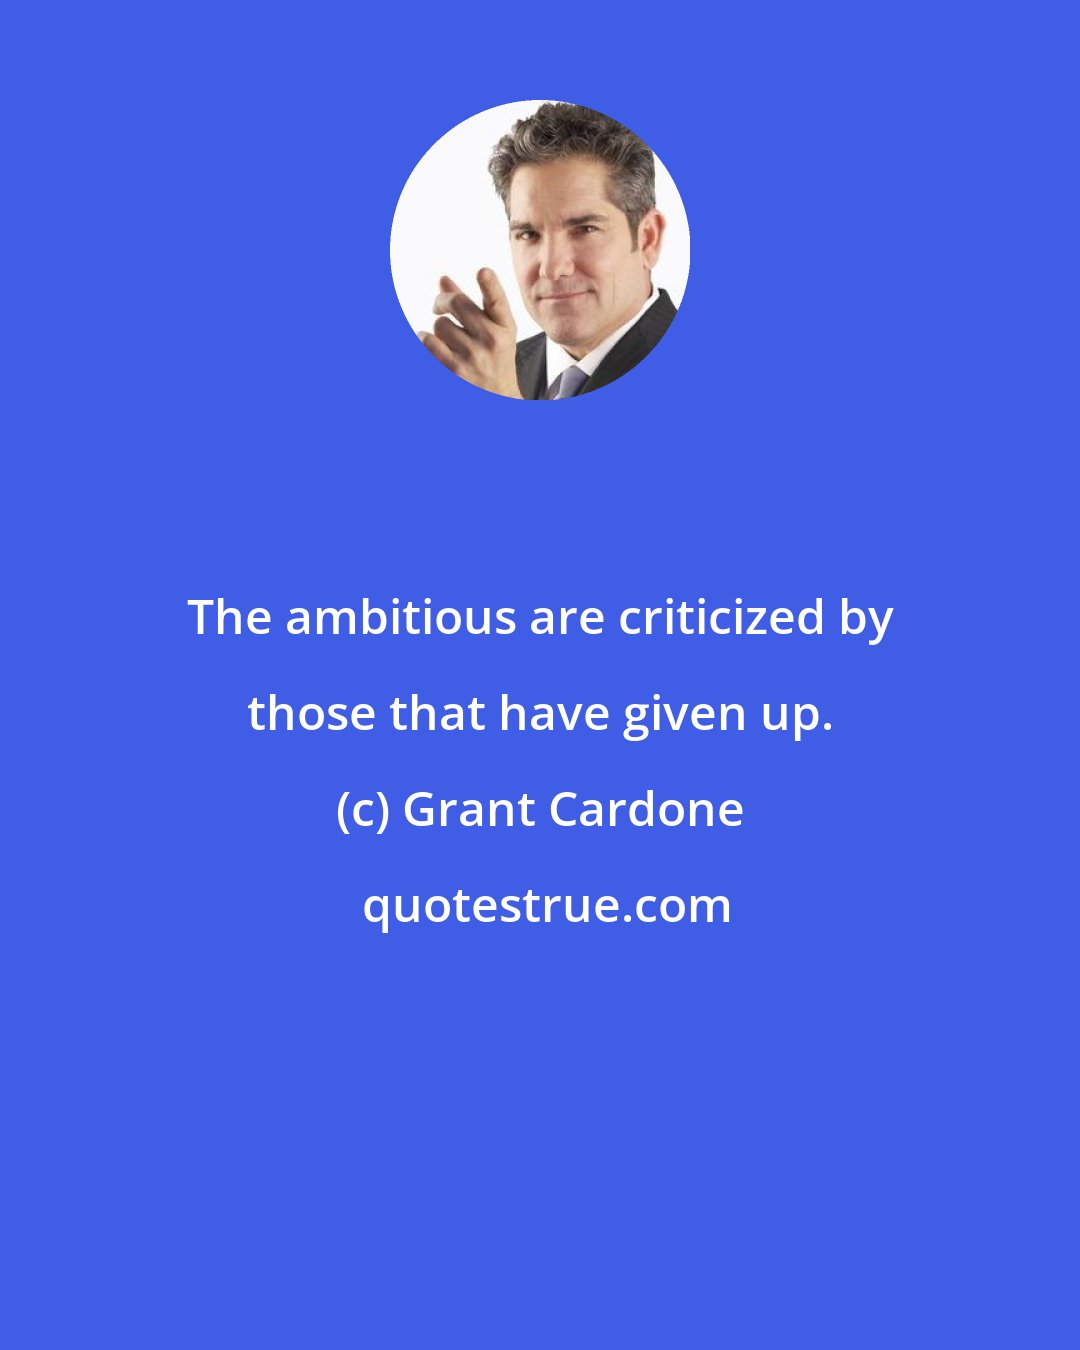 Grant Cardone: The ambitious are criticized by those that have given up.